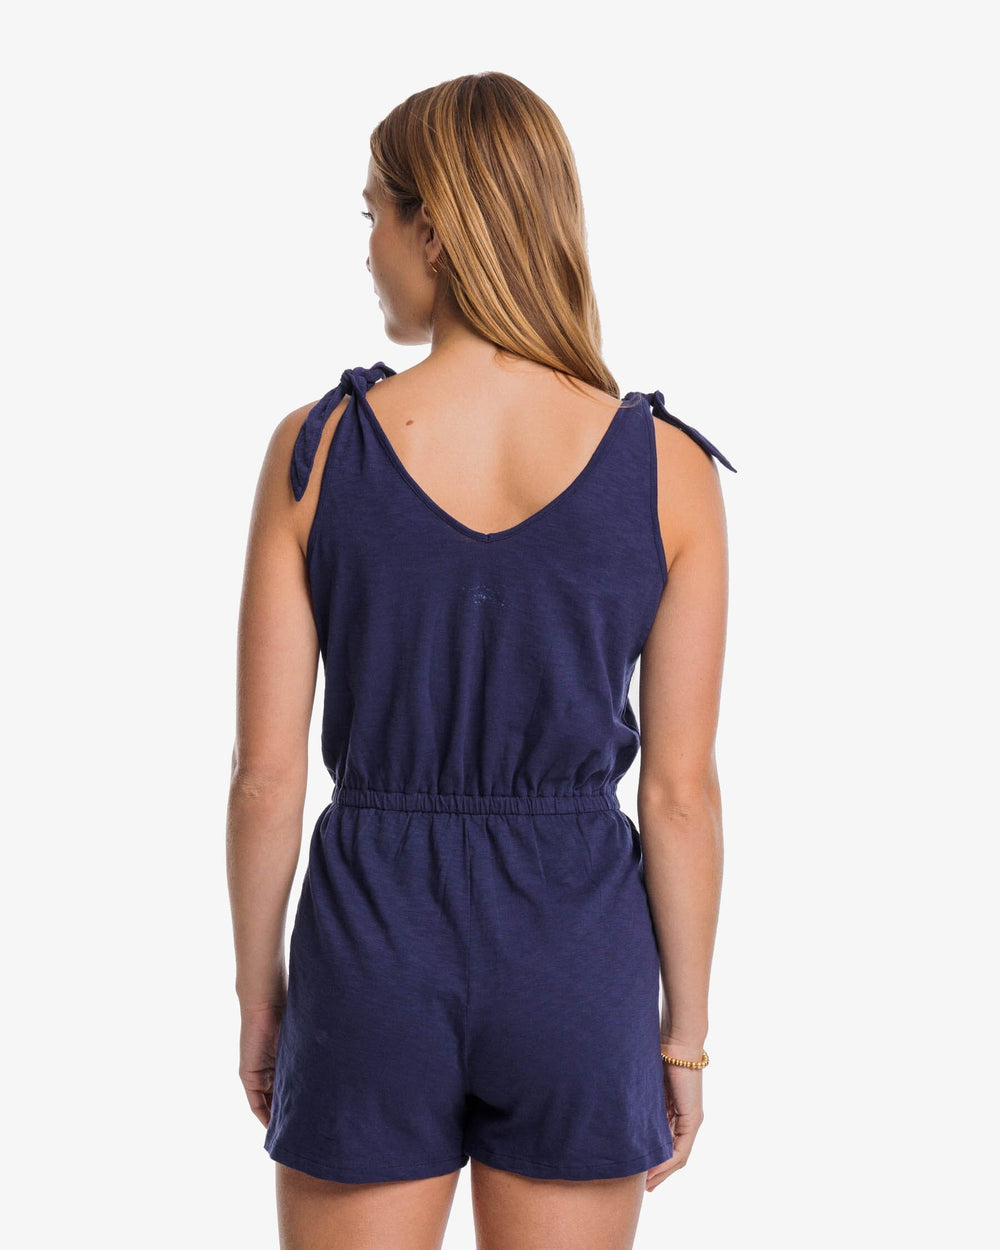 The back view of the Southern Tide Tillie Sun Farer Tie Shoulder Romper by Southern Tide - Nautical Navy